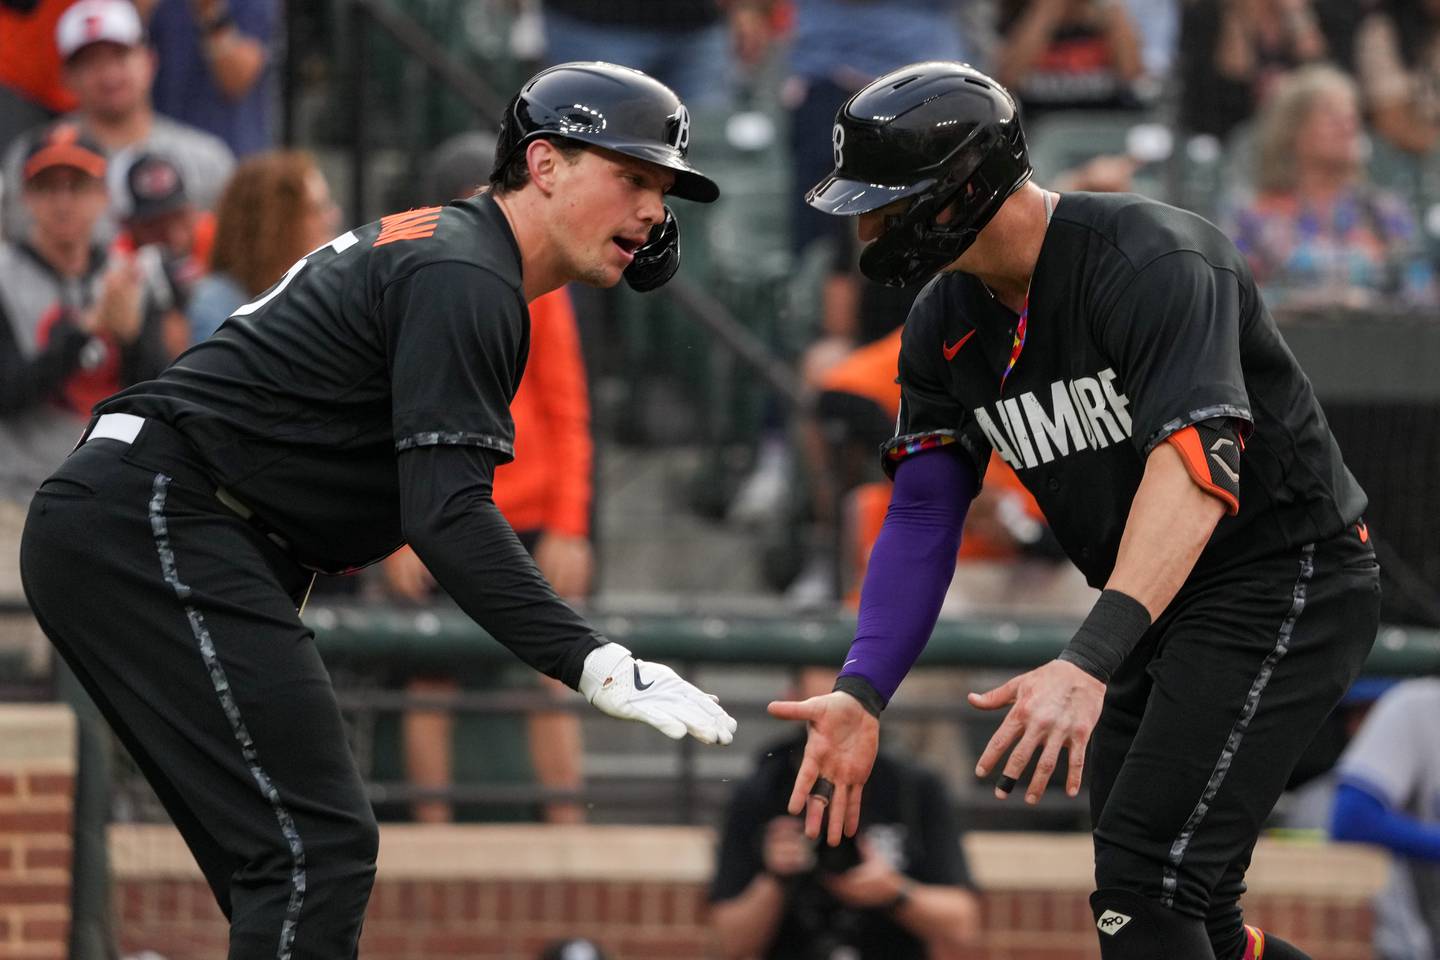 Baltimore Orioles left fielder Austin Hays (21) celebrates with catcher Adley Rutschman (35) after homering in a baseball game against the Kansas City Royals at Camden Yards on Friday, June 9, 2023.